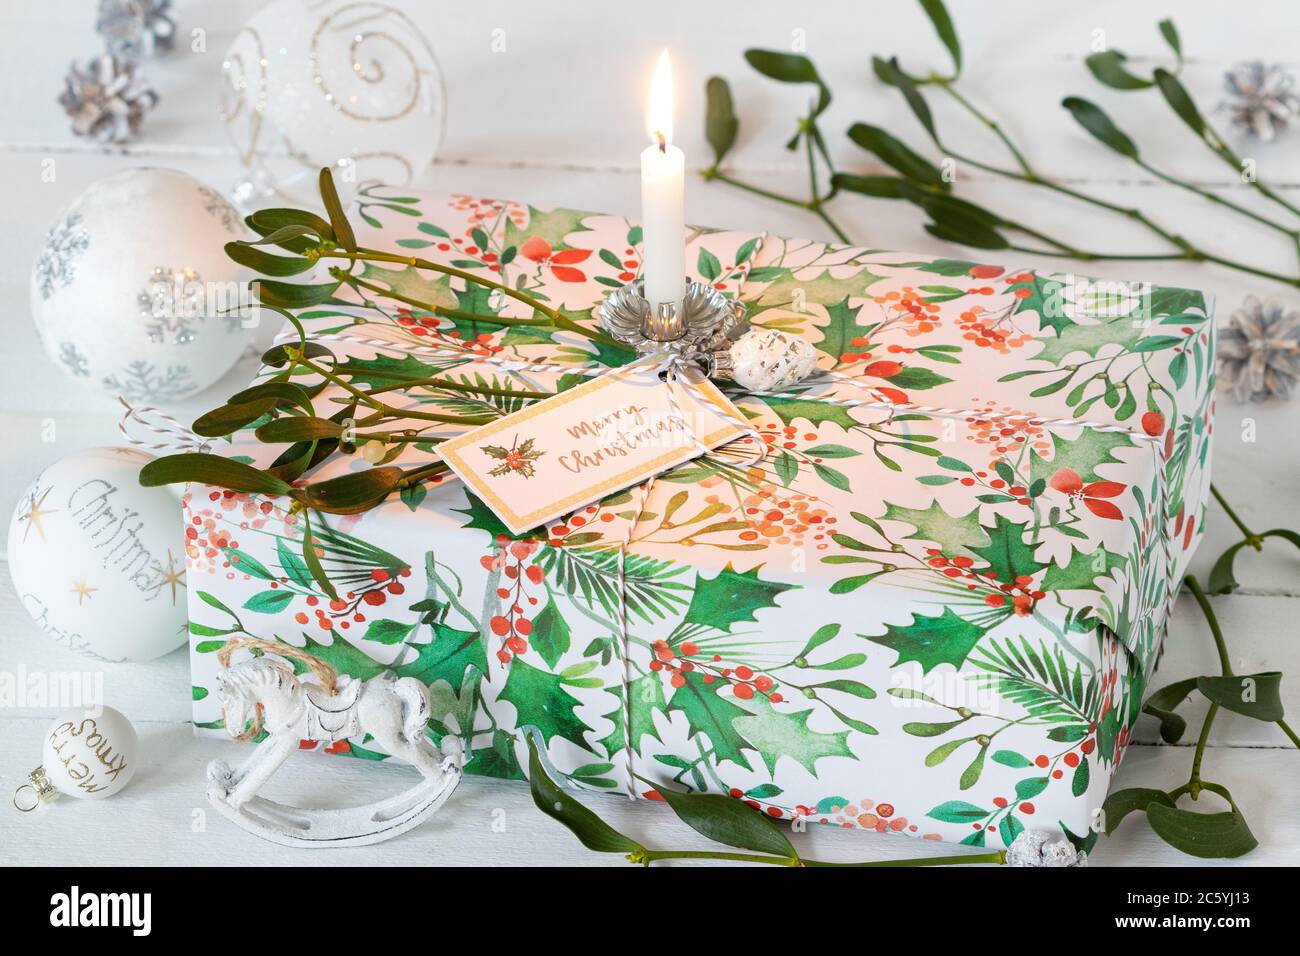 christmas present box decorated wirh mistletoe and candle Stock Photo